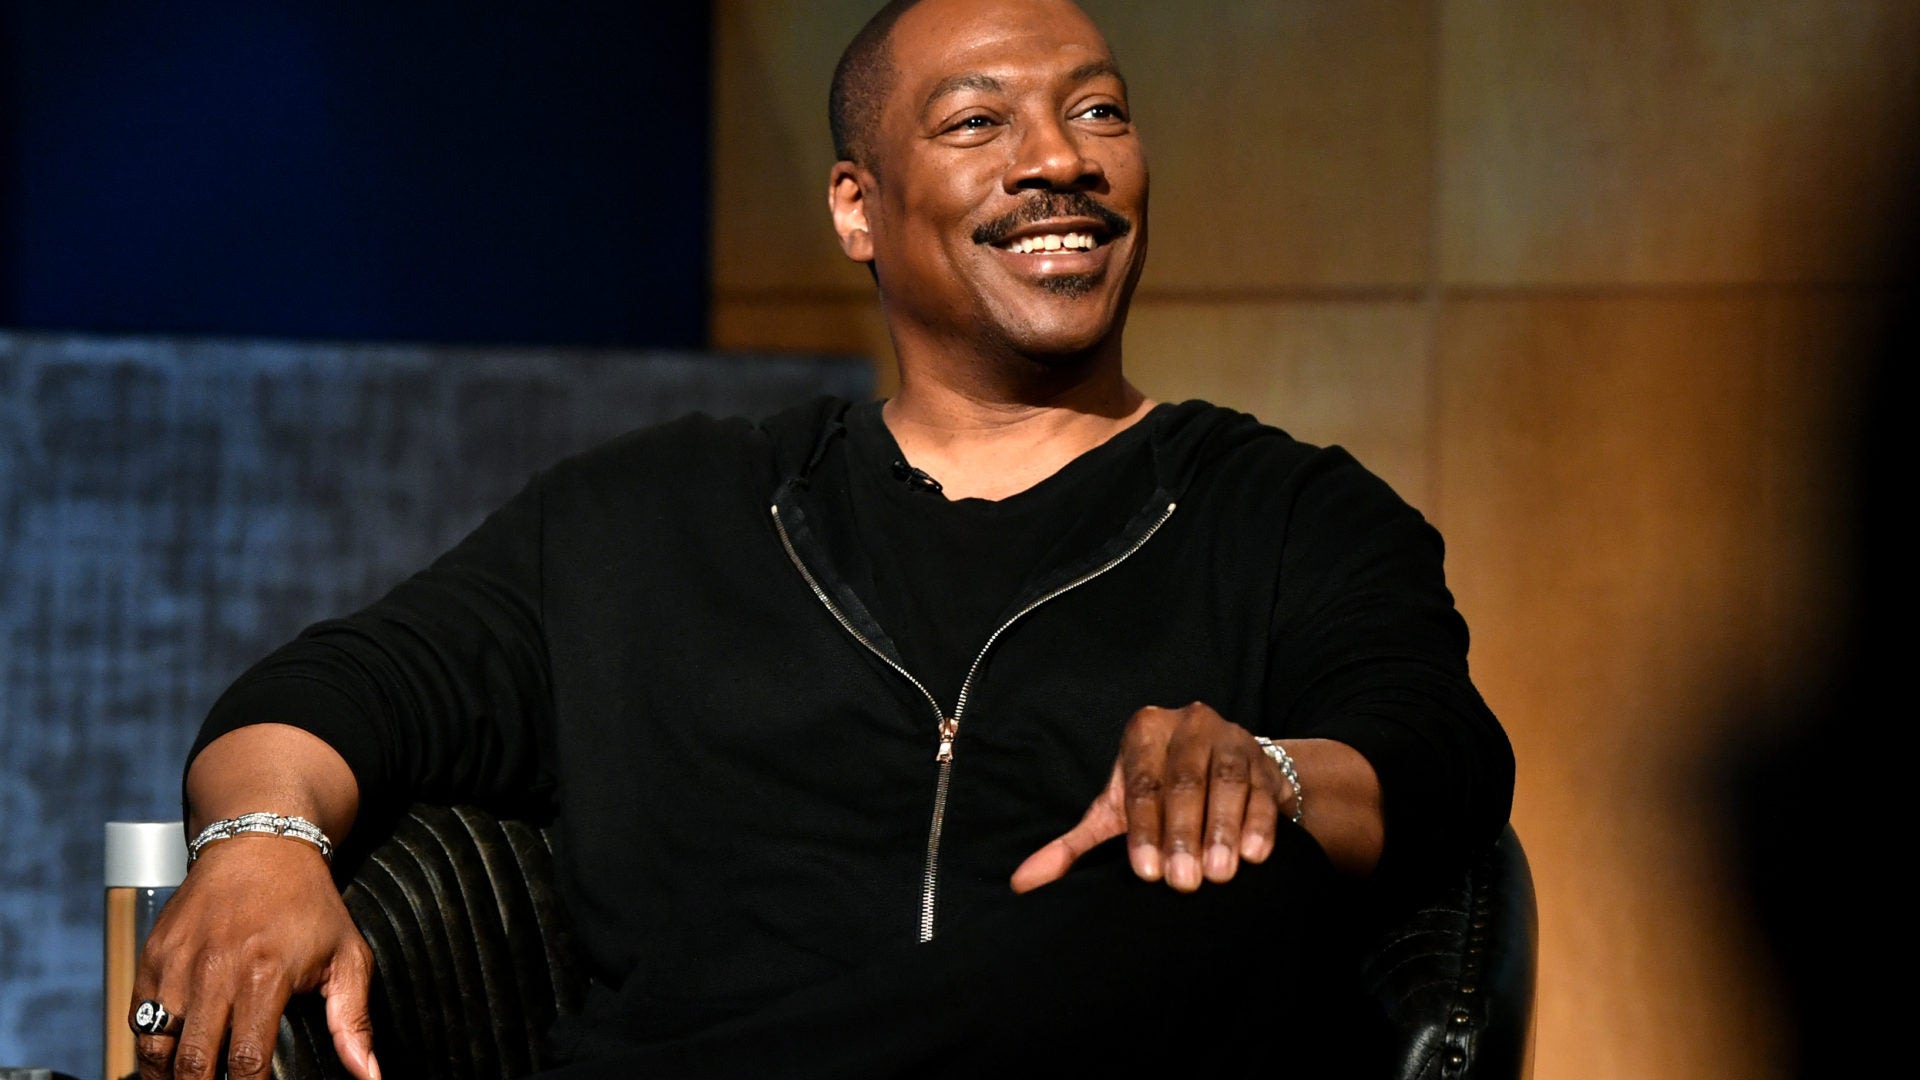 Opinion: Welcome Back Eddie Murphy, I've Missed You